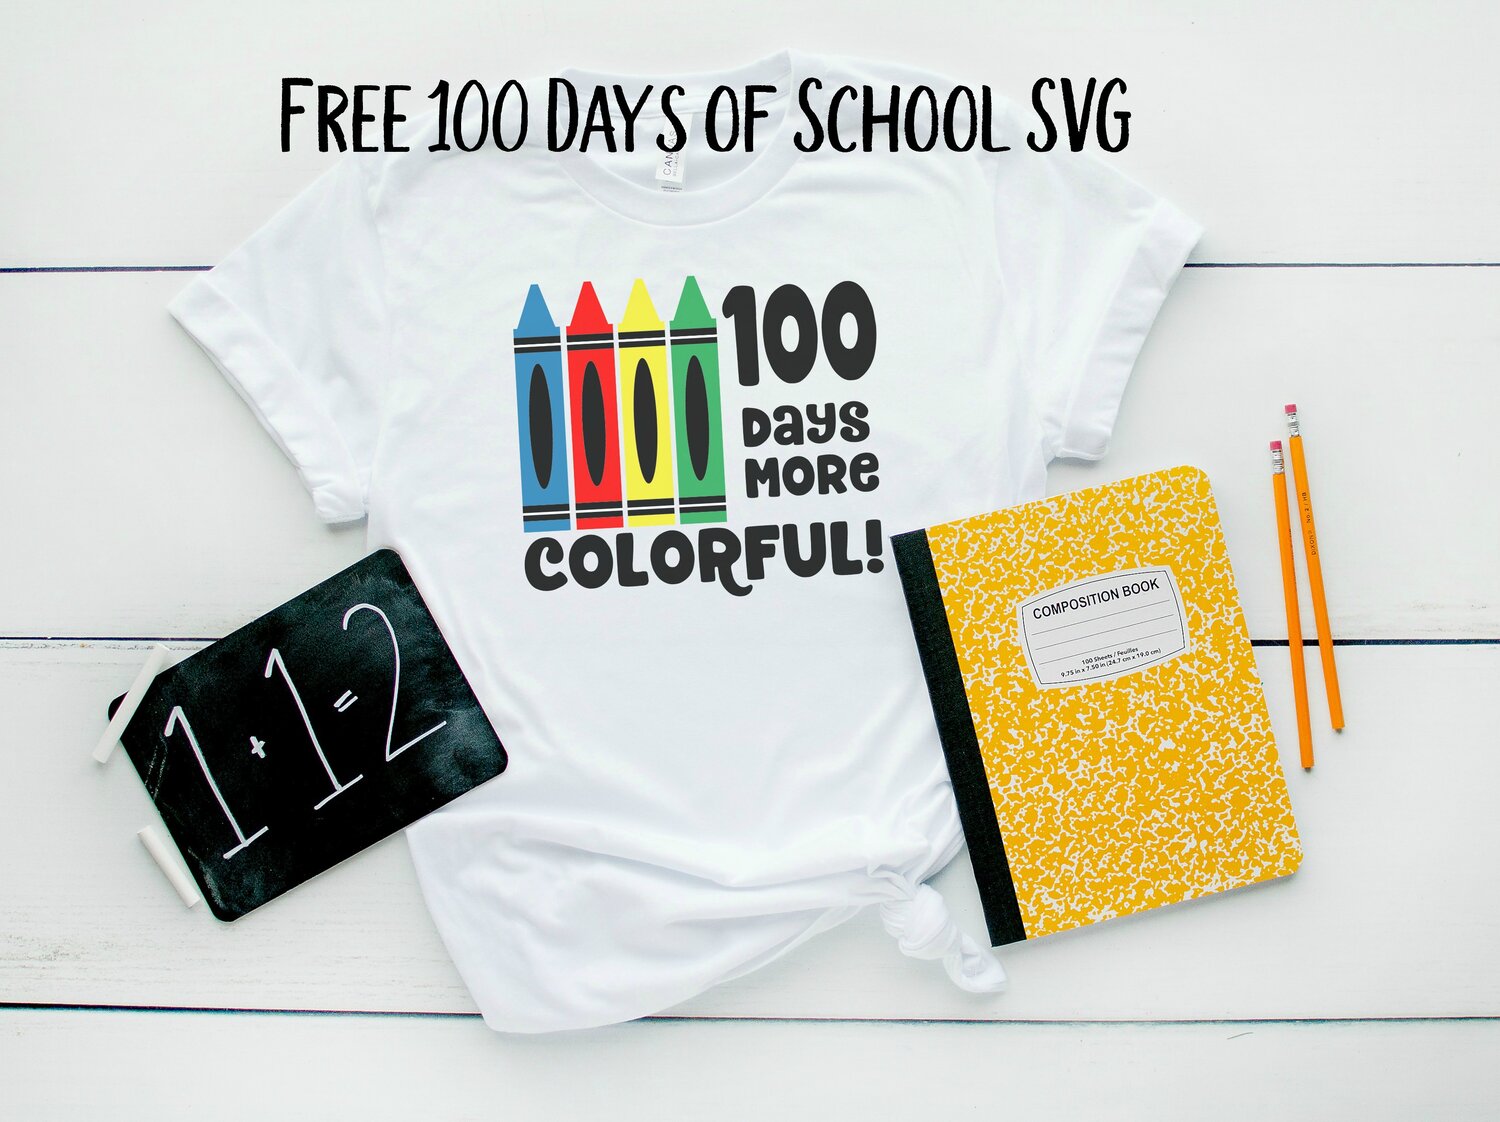 100 Days of School SVG DXF Printable Image for Iron-on Open Book 100 Days Smarter Stacked books 100 Days of School Cut File SVG